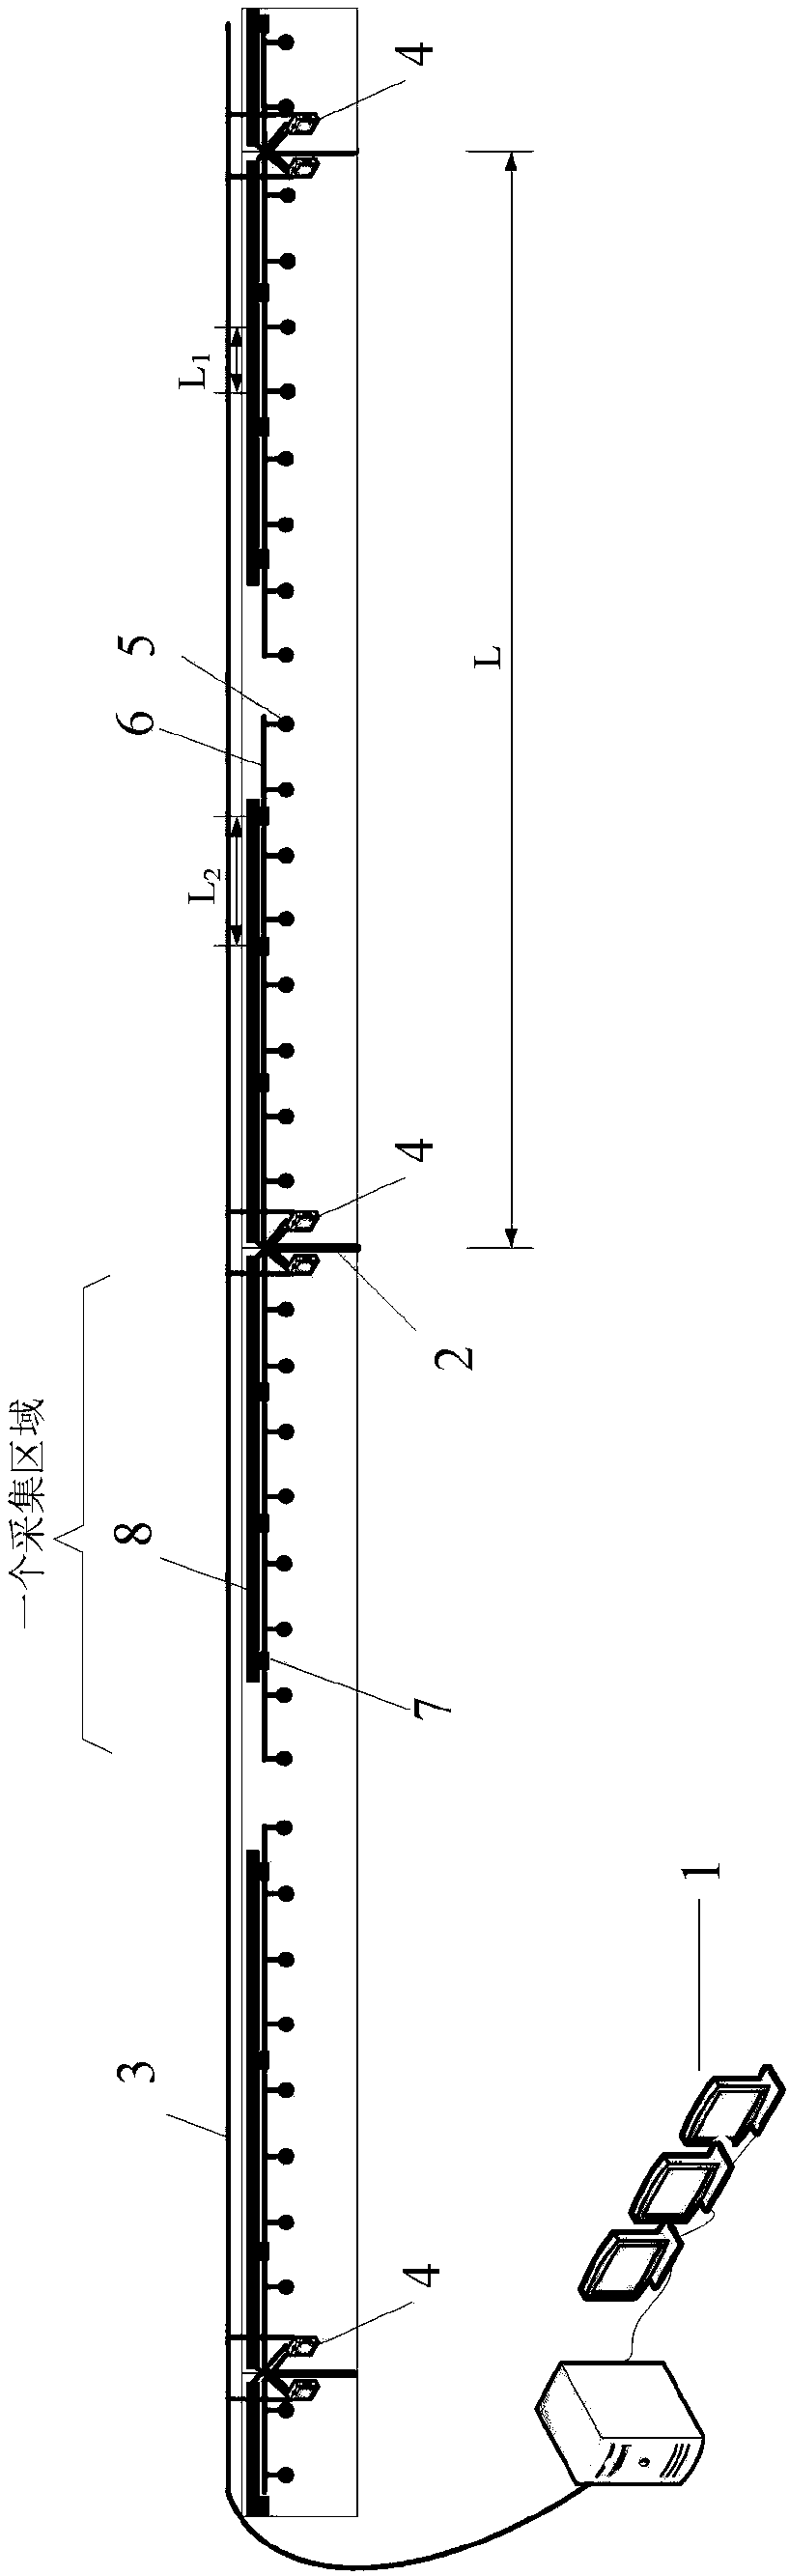 Pipe gallery fire information collection system and method for judging fire door opening timing